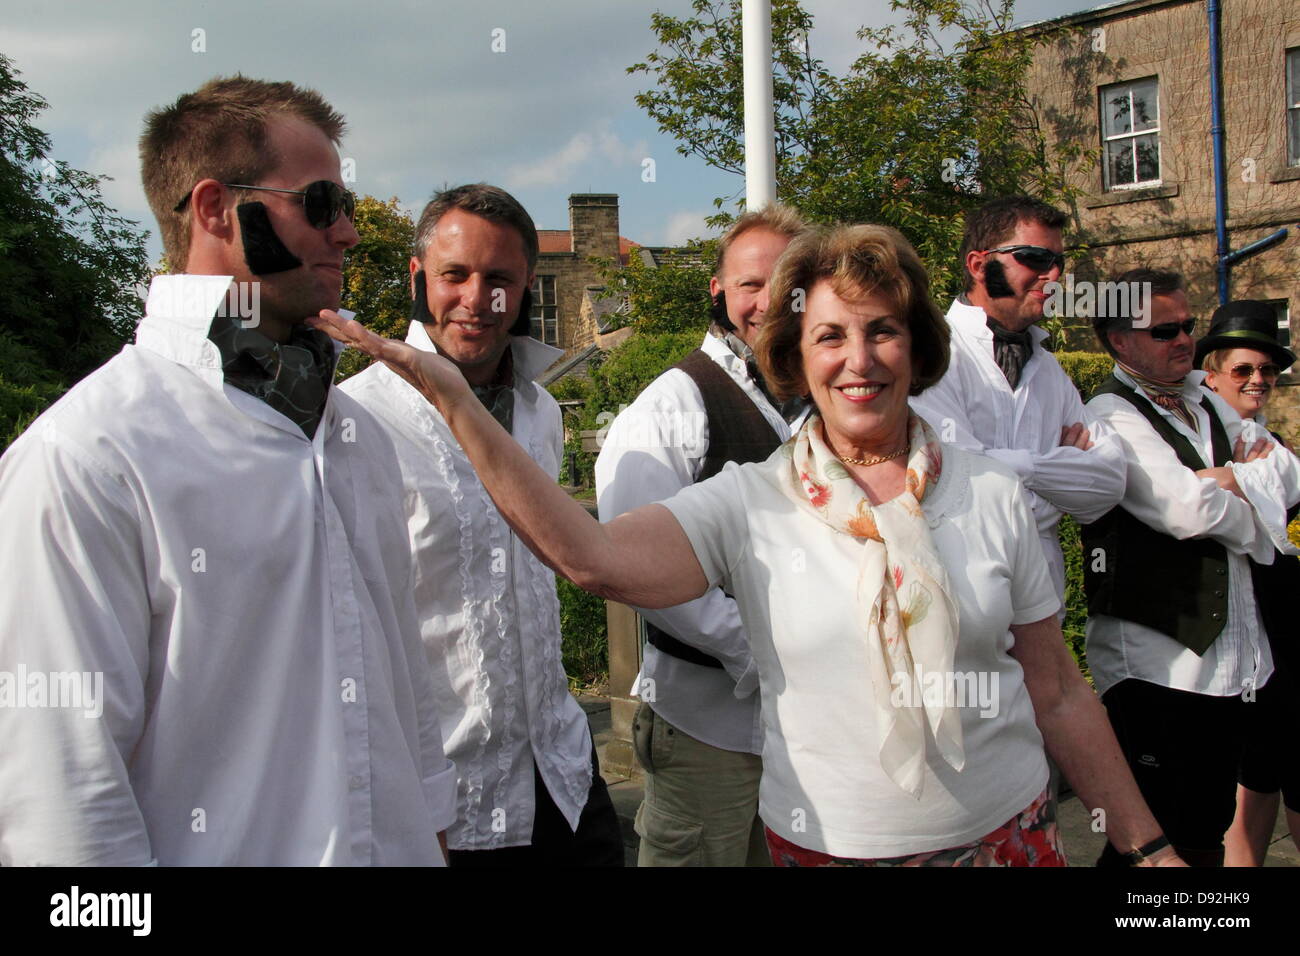 9th June 2013. Bakewell, Derbyshire, UK. Former MP Edwina Currie presides over the Best Dressed Darcy competition prior to the Mr Darcy Custard Pie Fight. The fight marked the 200th anniversary of Jane Austen's Pride and Prejudice that was part written in Bakewell's Rutland Arms Hotel. The fight faced cancellation after organisers had difficulty finding insurance due to health and safety fears. It was reinstated after Olympic insurers stepped in. Teams, with one member dressed as Darcy, had to protect their Darcy while pieing opposing teams. The team with the cleanest Darcy won. Stock Photo